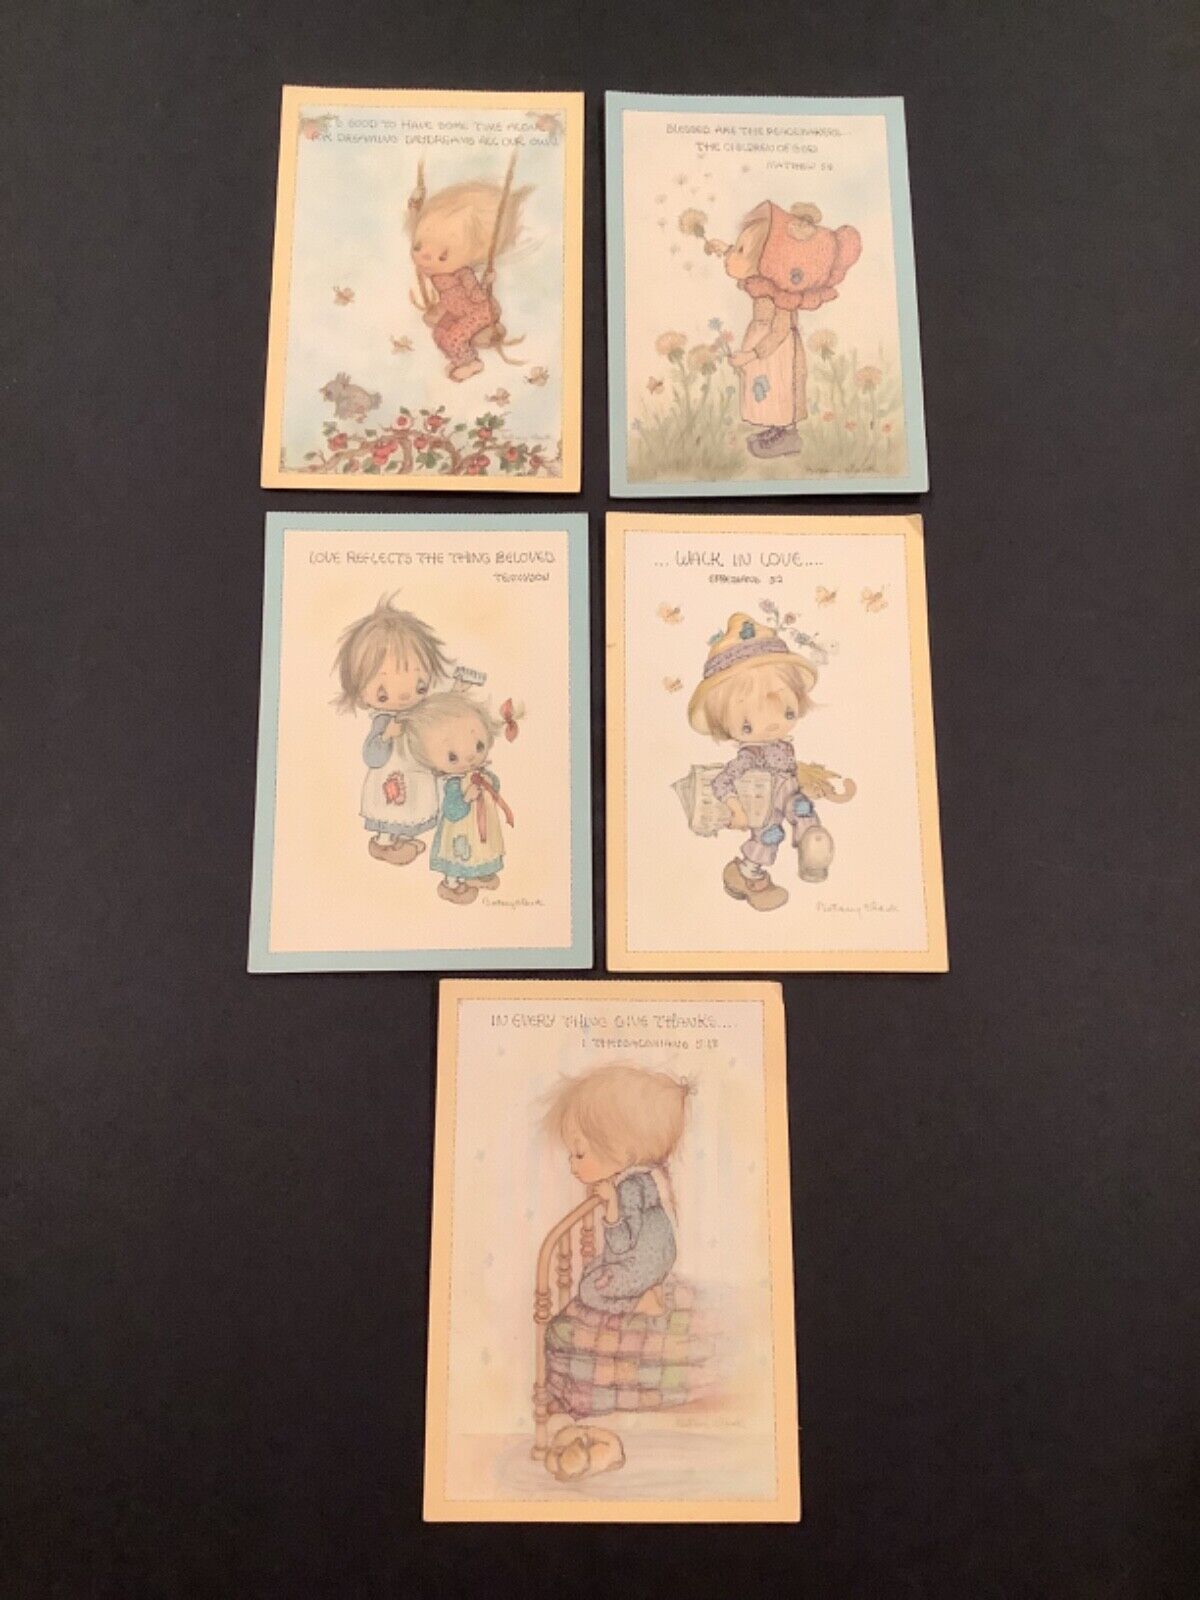 Vintage PRECIOUS MOMENTS 5x7 Greeting Card Lot of 5 For Framing Wall Art Decor